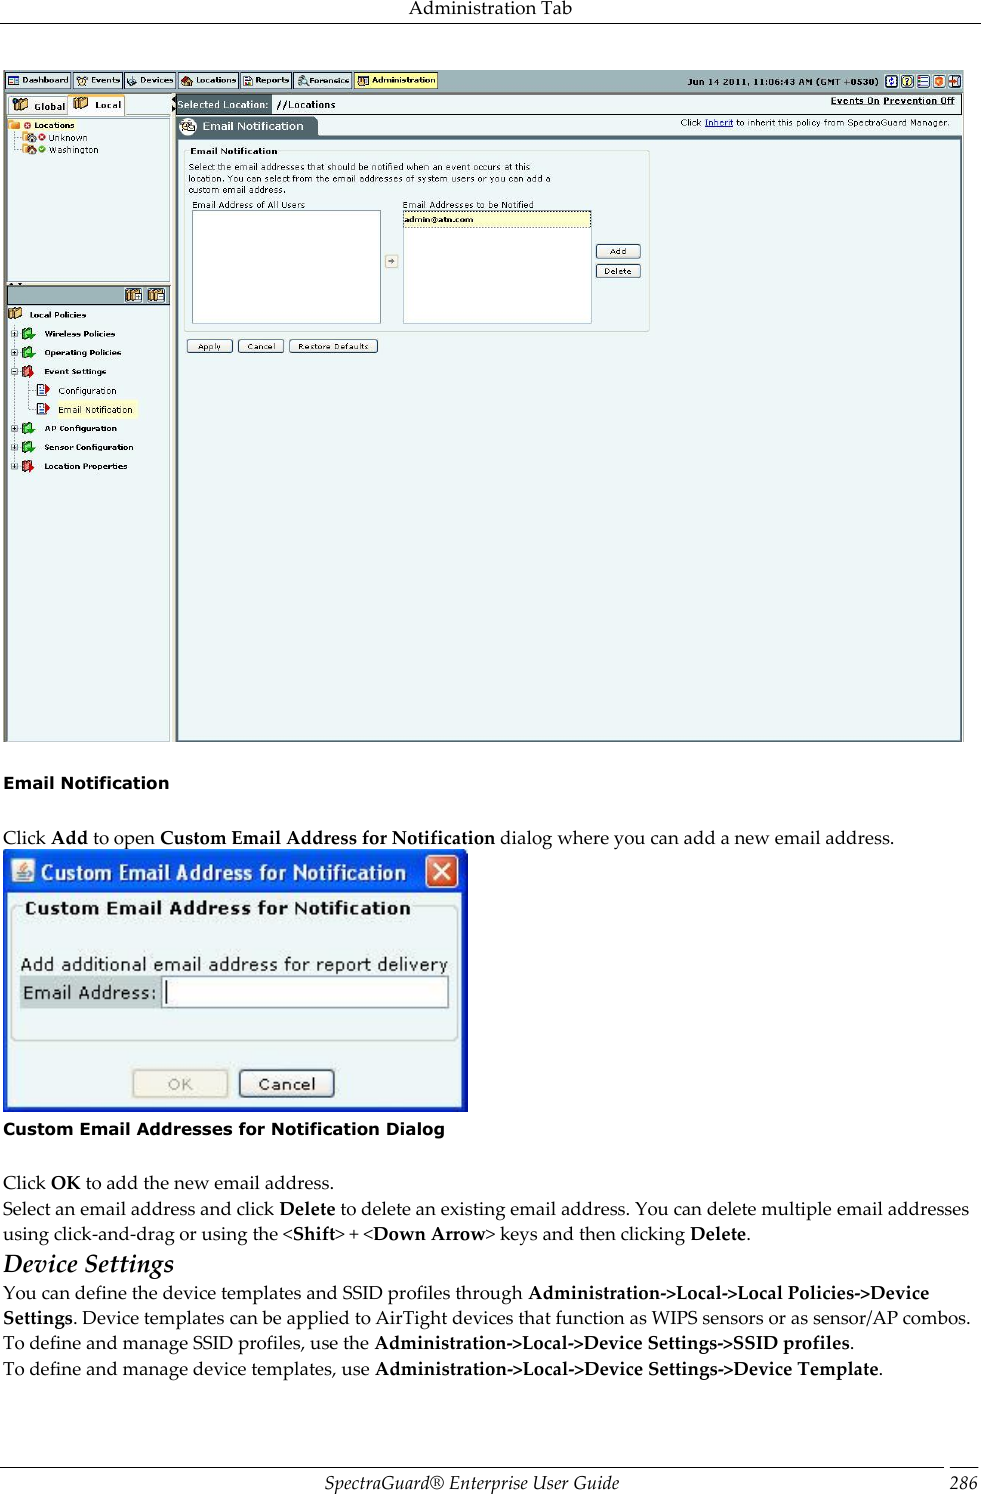 Administration Tab SpectraGuard®  Enterprise User Guide 286    Email Notification   Click Add to open Custom Email Address for Notification dialog where you can add a new email address.  Custom Email Addresses for Notification Dialog   Click OK to add the new email address. Select an email address and click Delete to delete an existing email address. You can delete multiple email addresses using click-and-drag or using the &lt;Shift&gt; + &lt;Down Arrow&gt; keys and then clicking Delete. Device Settings You can define the device templates and SSID profiles through Administration-&gt;Local-&gt;Local Policies-&gt;Device Settings. Device templates can be applied to AirTight devices that function as WIPS sensors or as sensor/AP combos. To define and manage SSID profiles, use the Administration-&gt;Local-&gt;Device Settings-&gt;SSID profiles. To define and manage device templates, use Administration-&gt;Local-&gt;Device Settings-&gt;Device Template.   